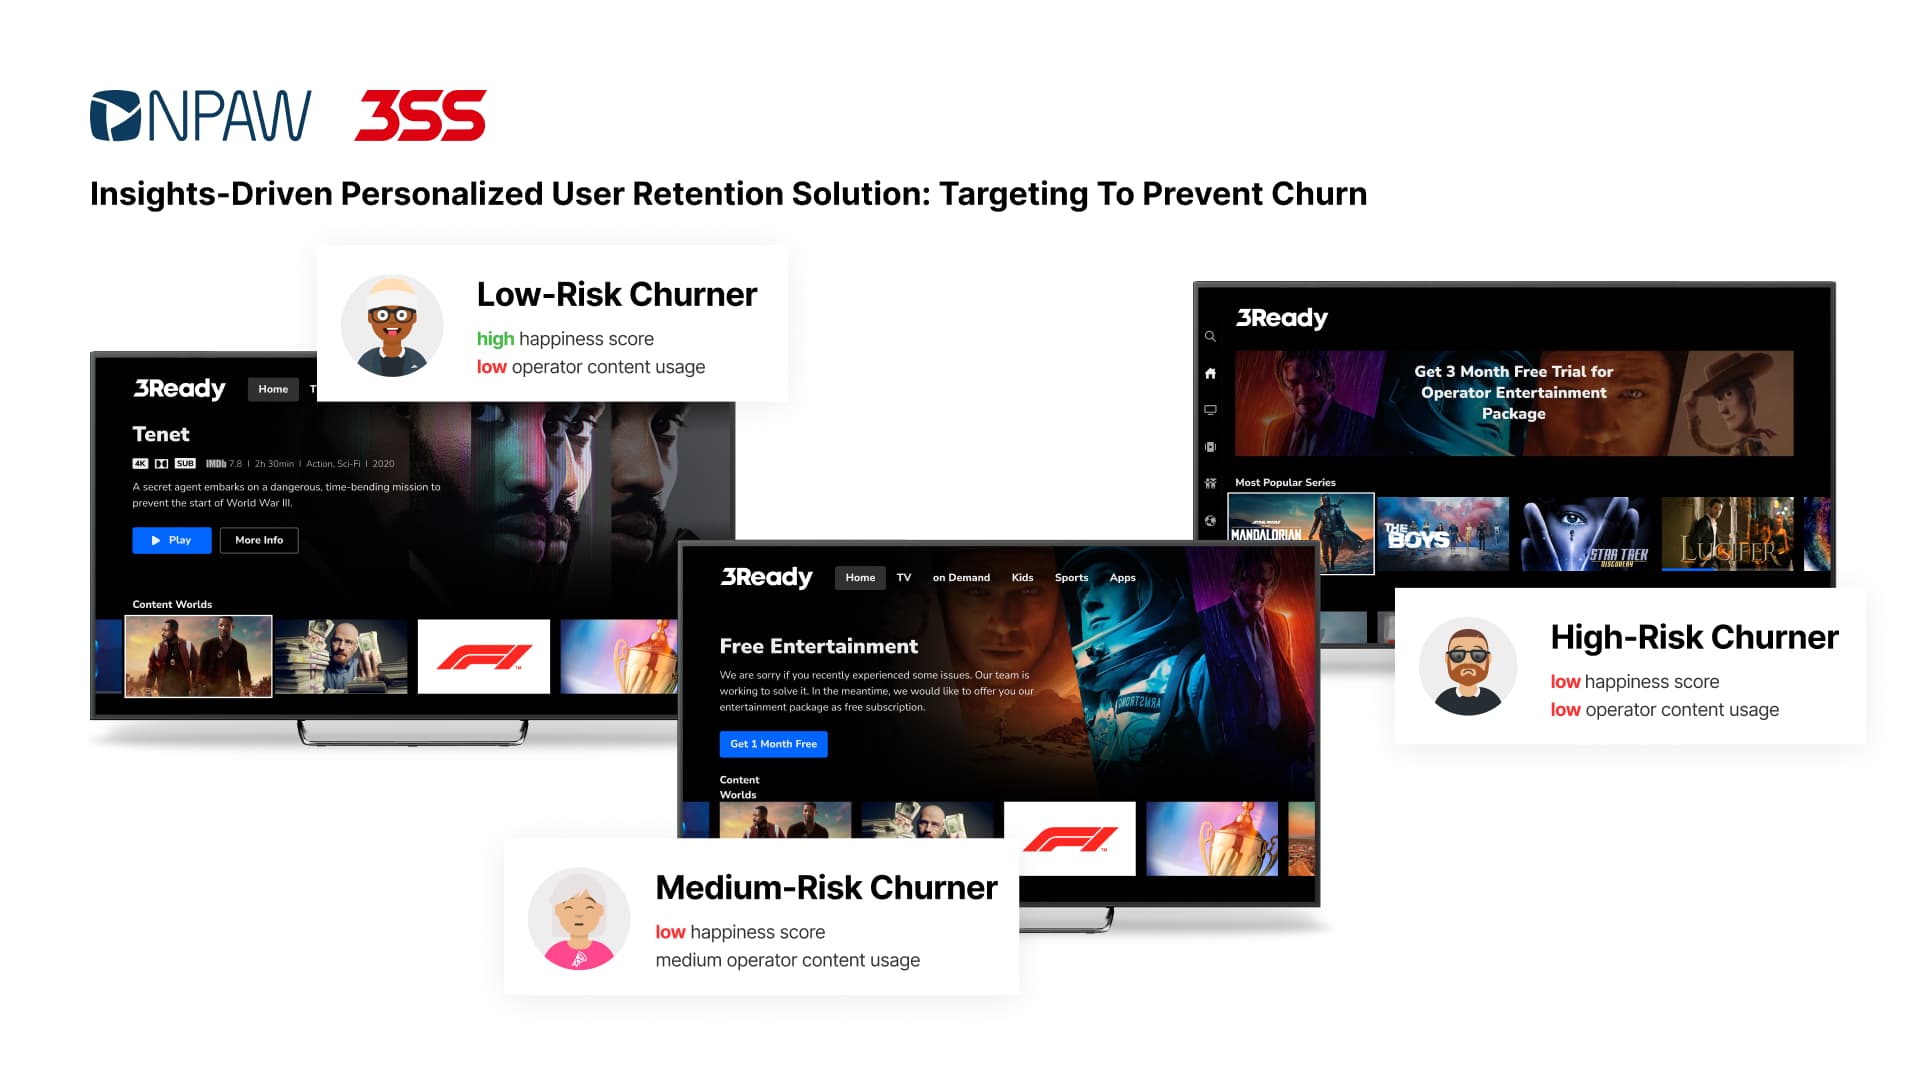 Churn Prevention with Insights-Driven Personalized User Retention Solution from NPAW and 3SS